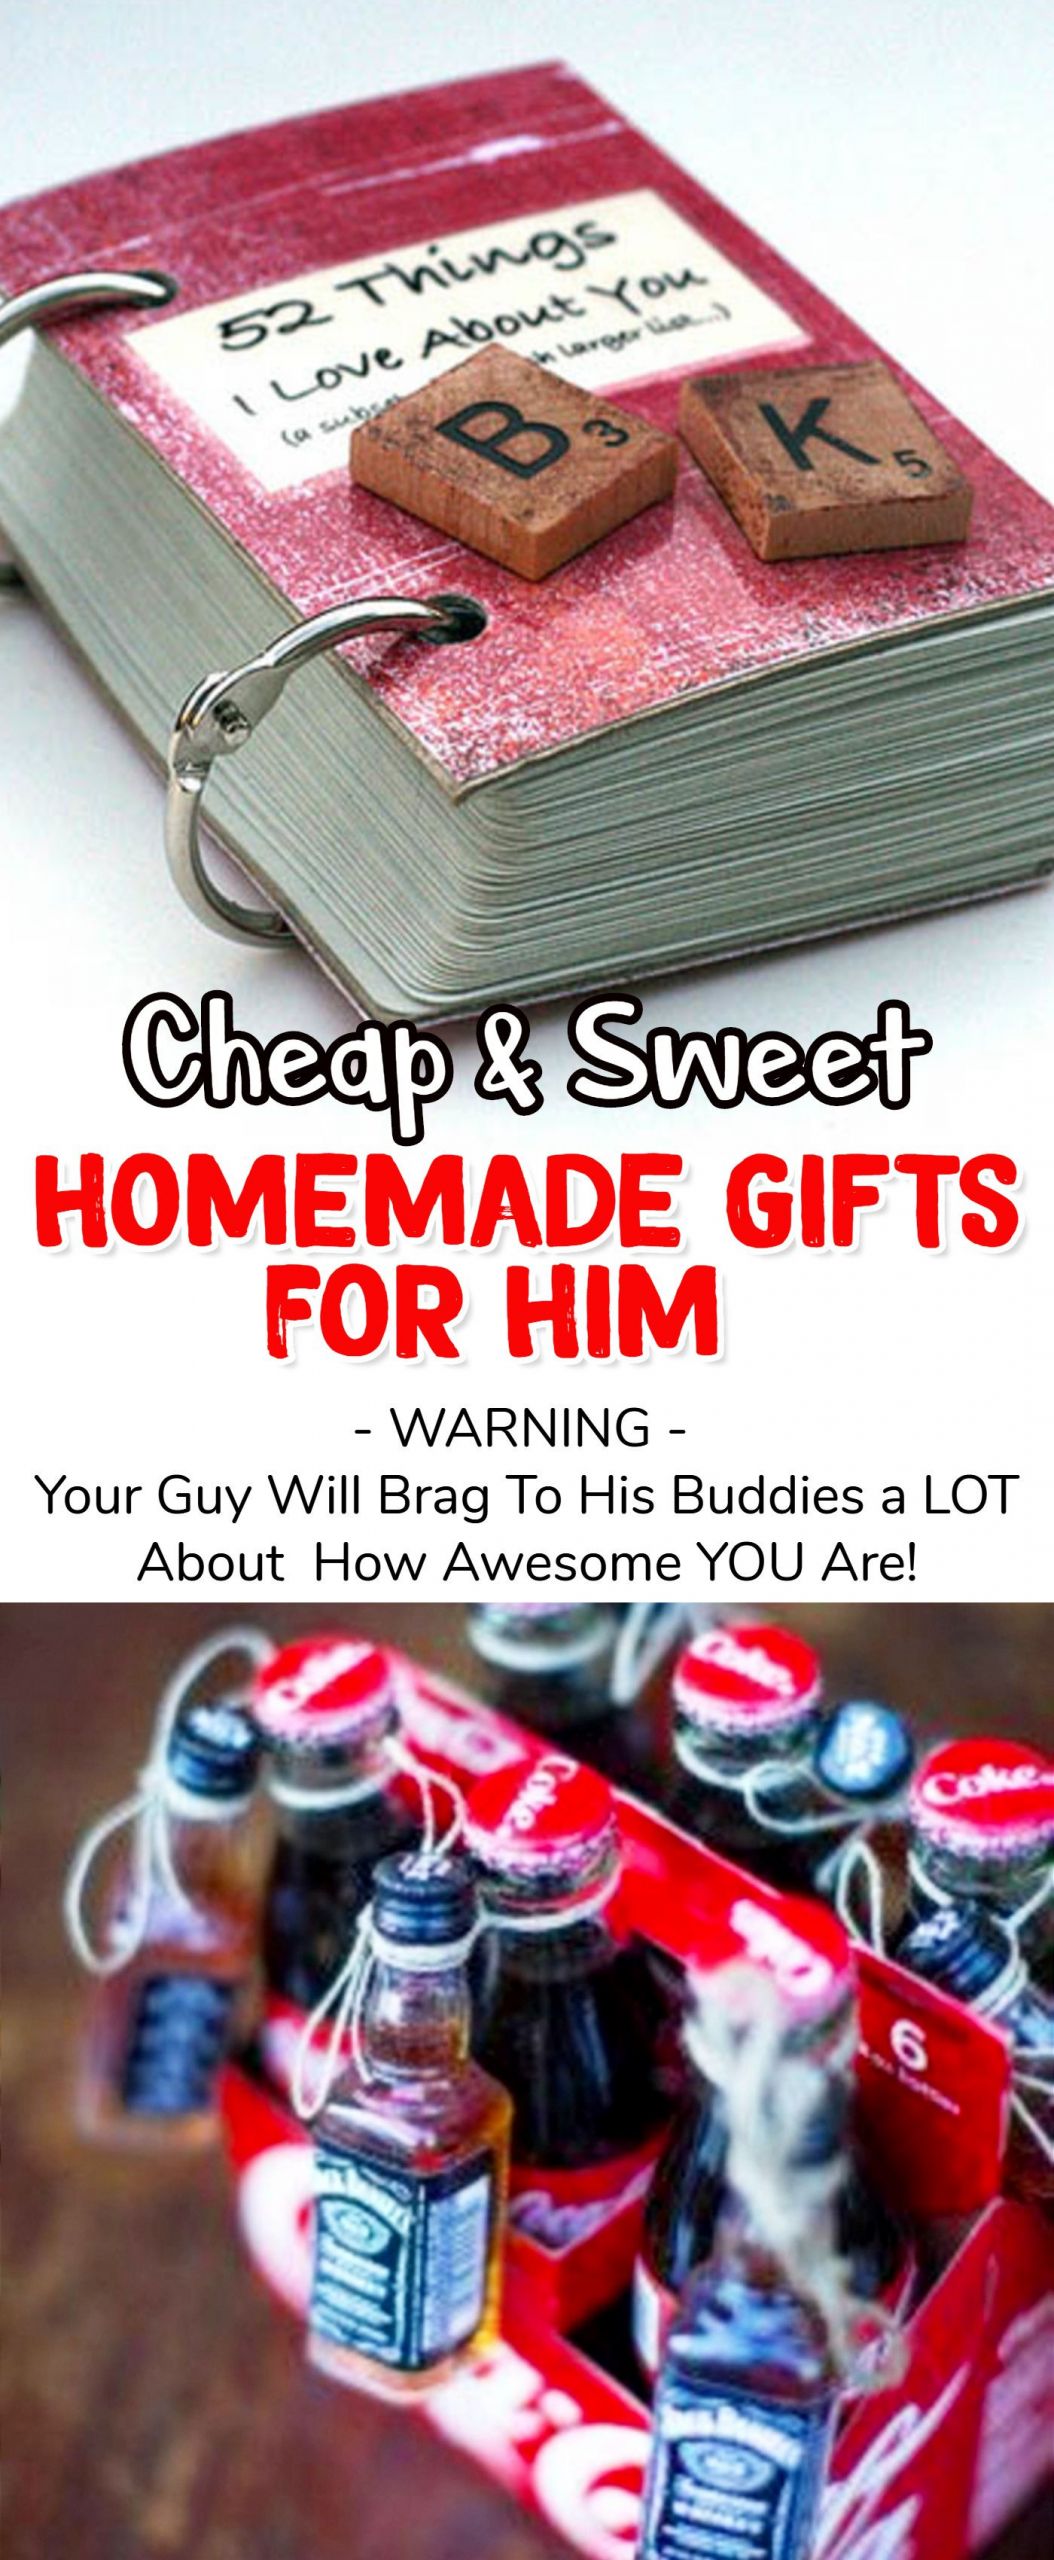 Sentimental Gift Ideas For Boyfriend
 Homemade Gift Ideas For Him 26 Romantic DIY Gifts To